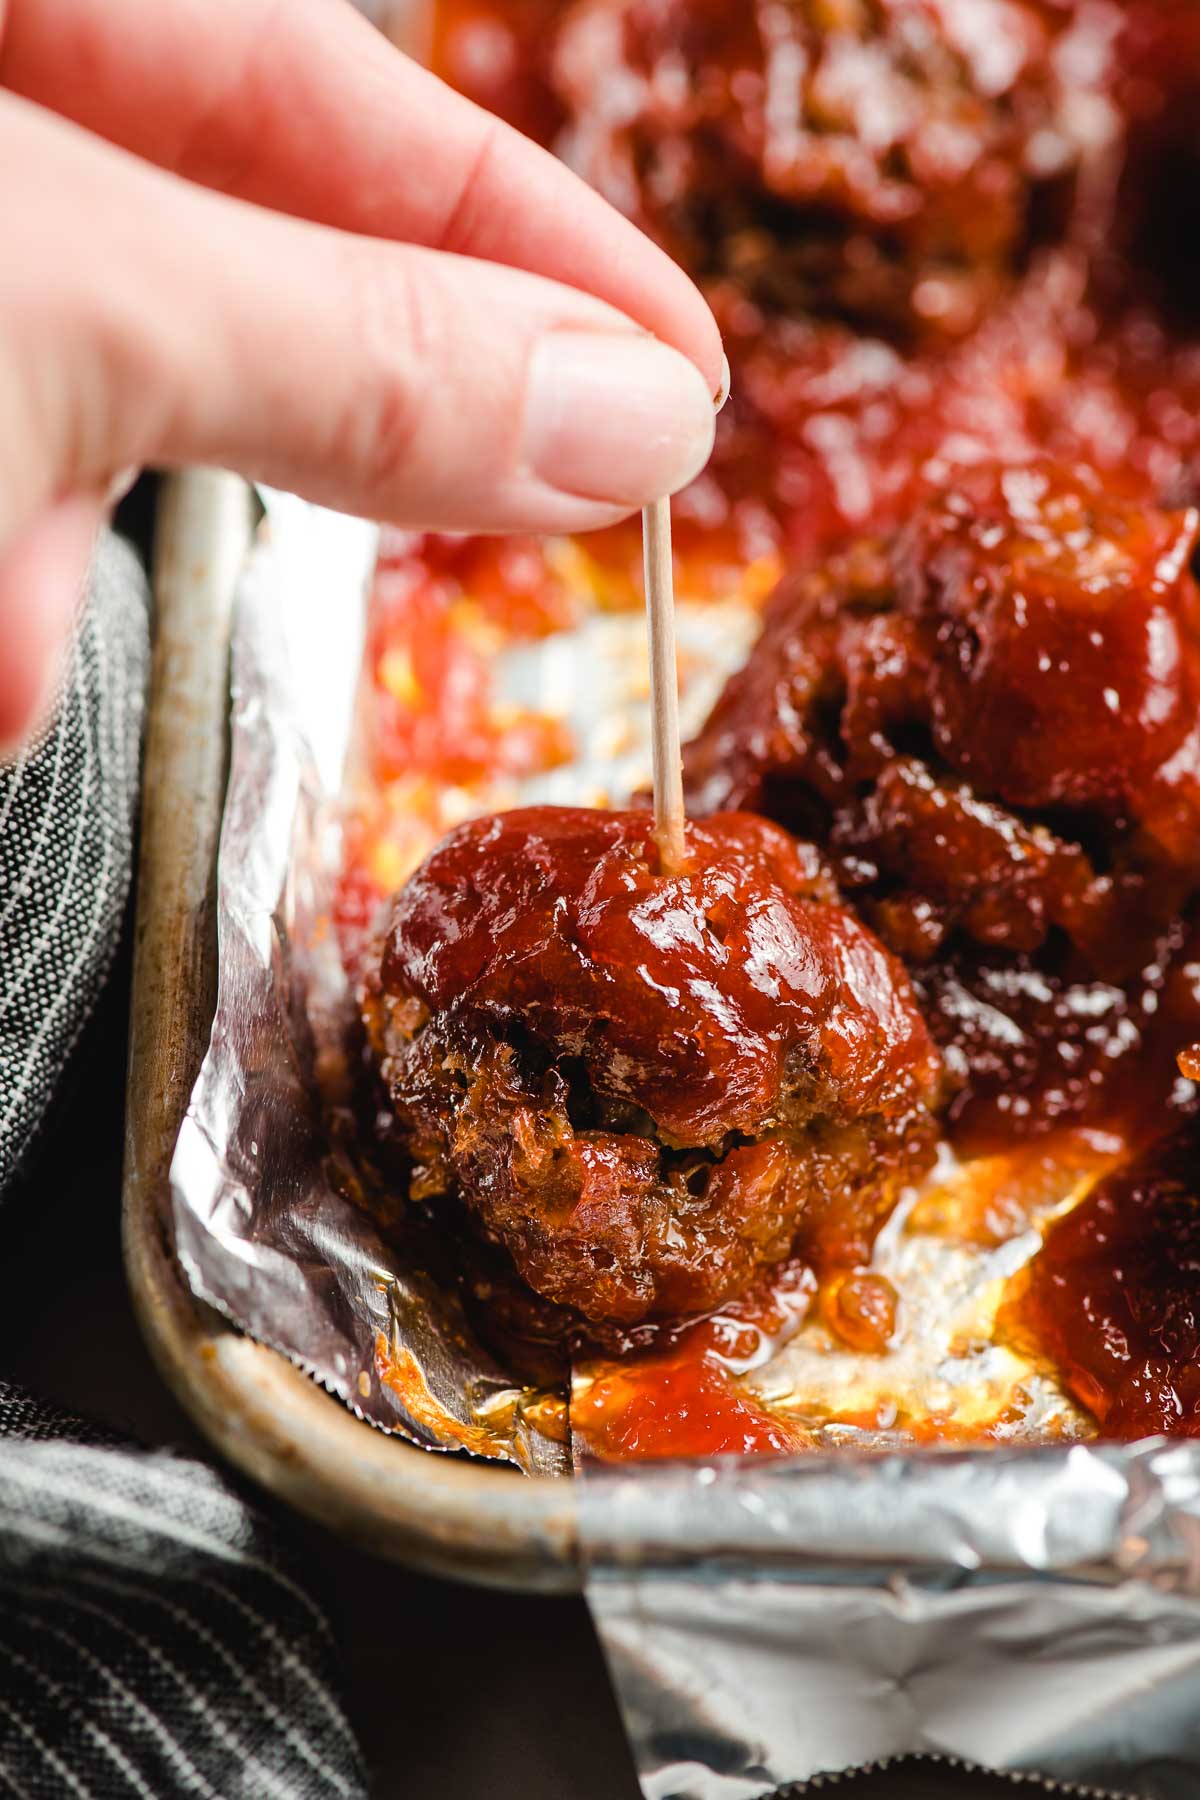 Finger picking up a barbecue meatball with a toothpick.